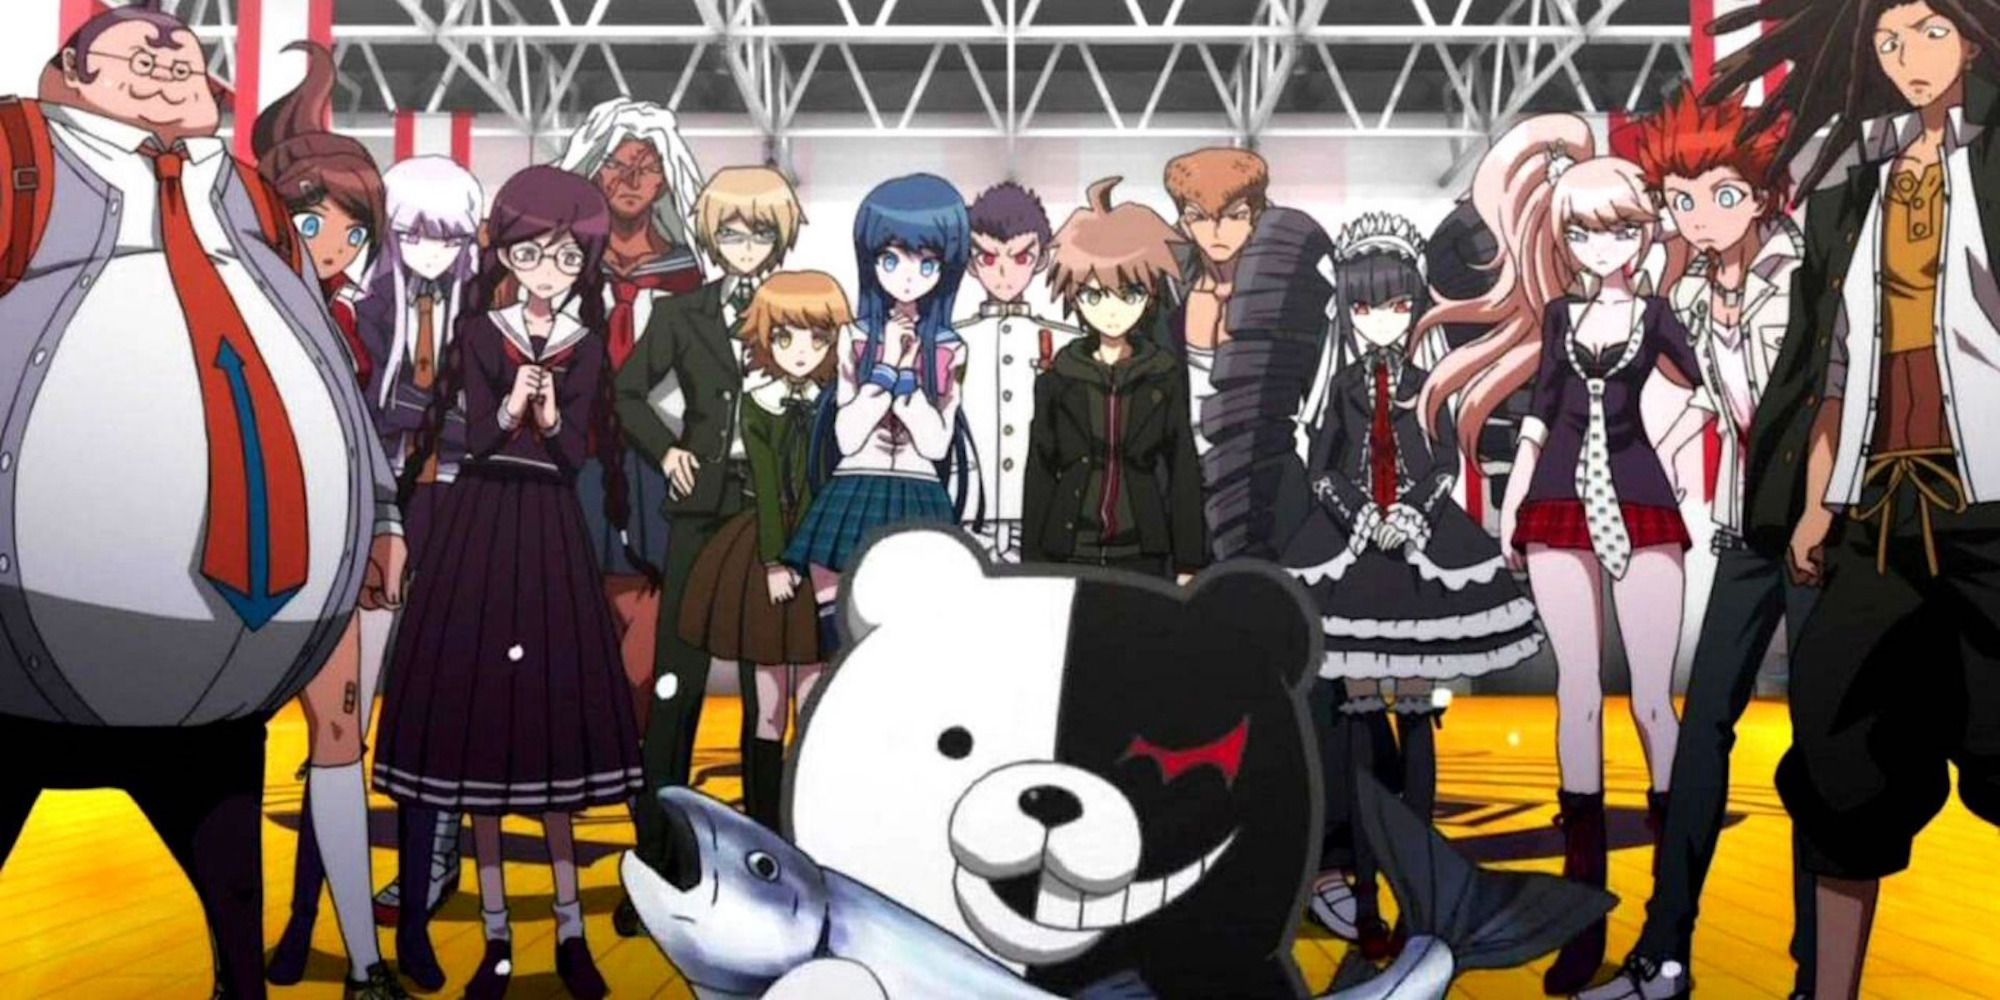 A scene featuring characters from Danganronpa